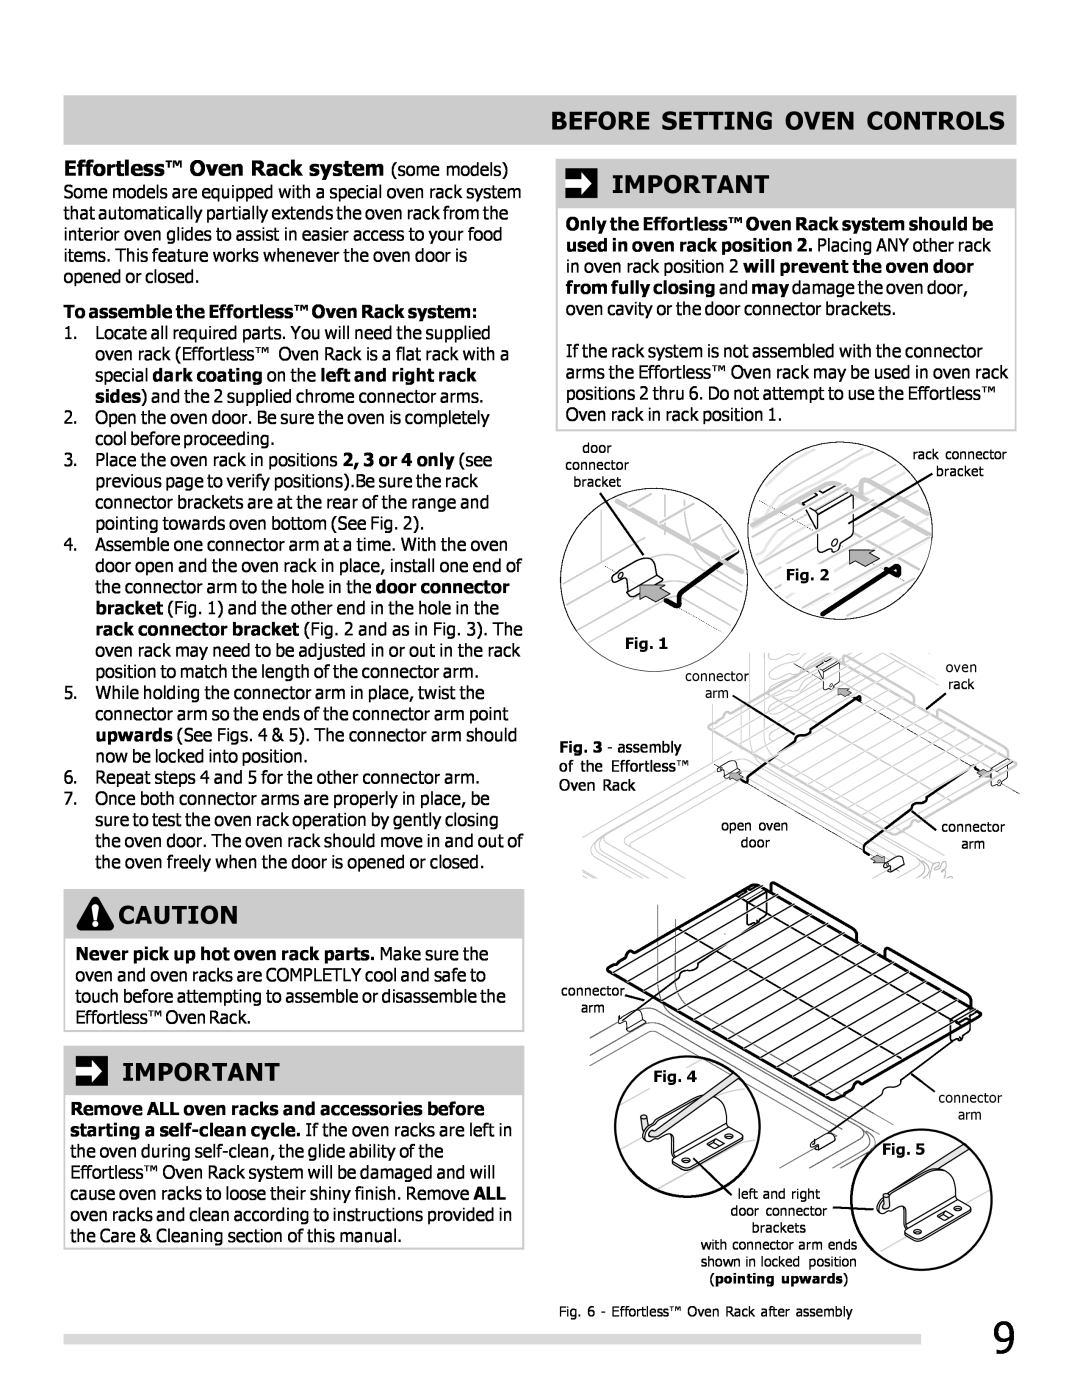 Frigidaire FPEF3081MF important safety instructions Effortless Oven Rack system some models, Before Setting Oven Controls 